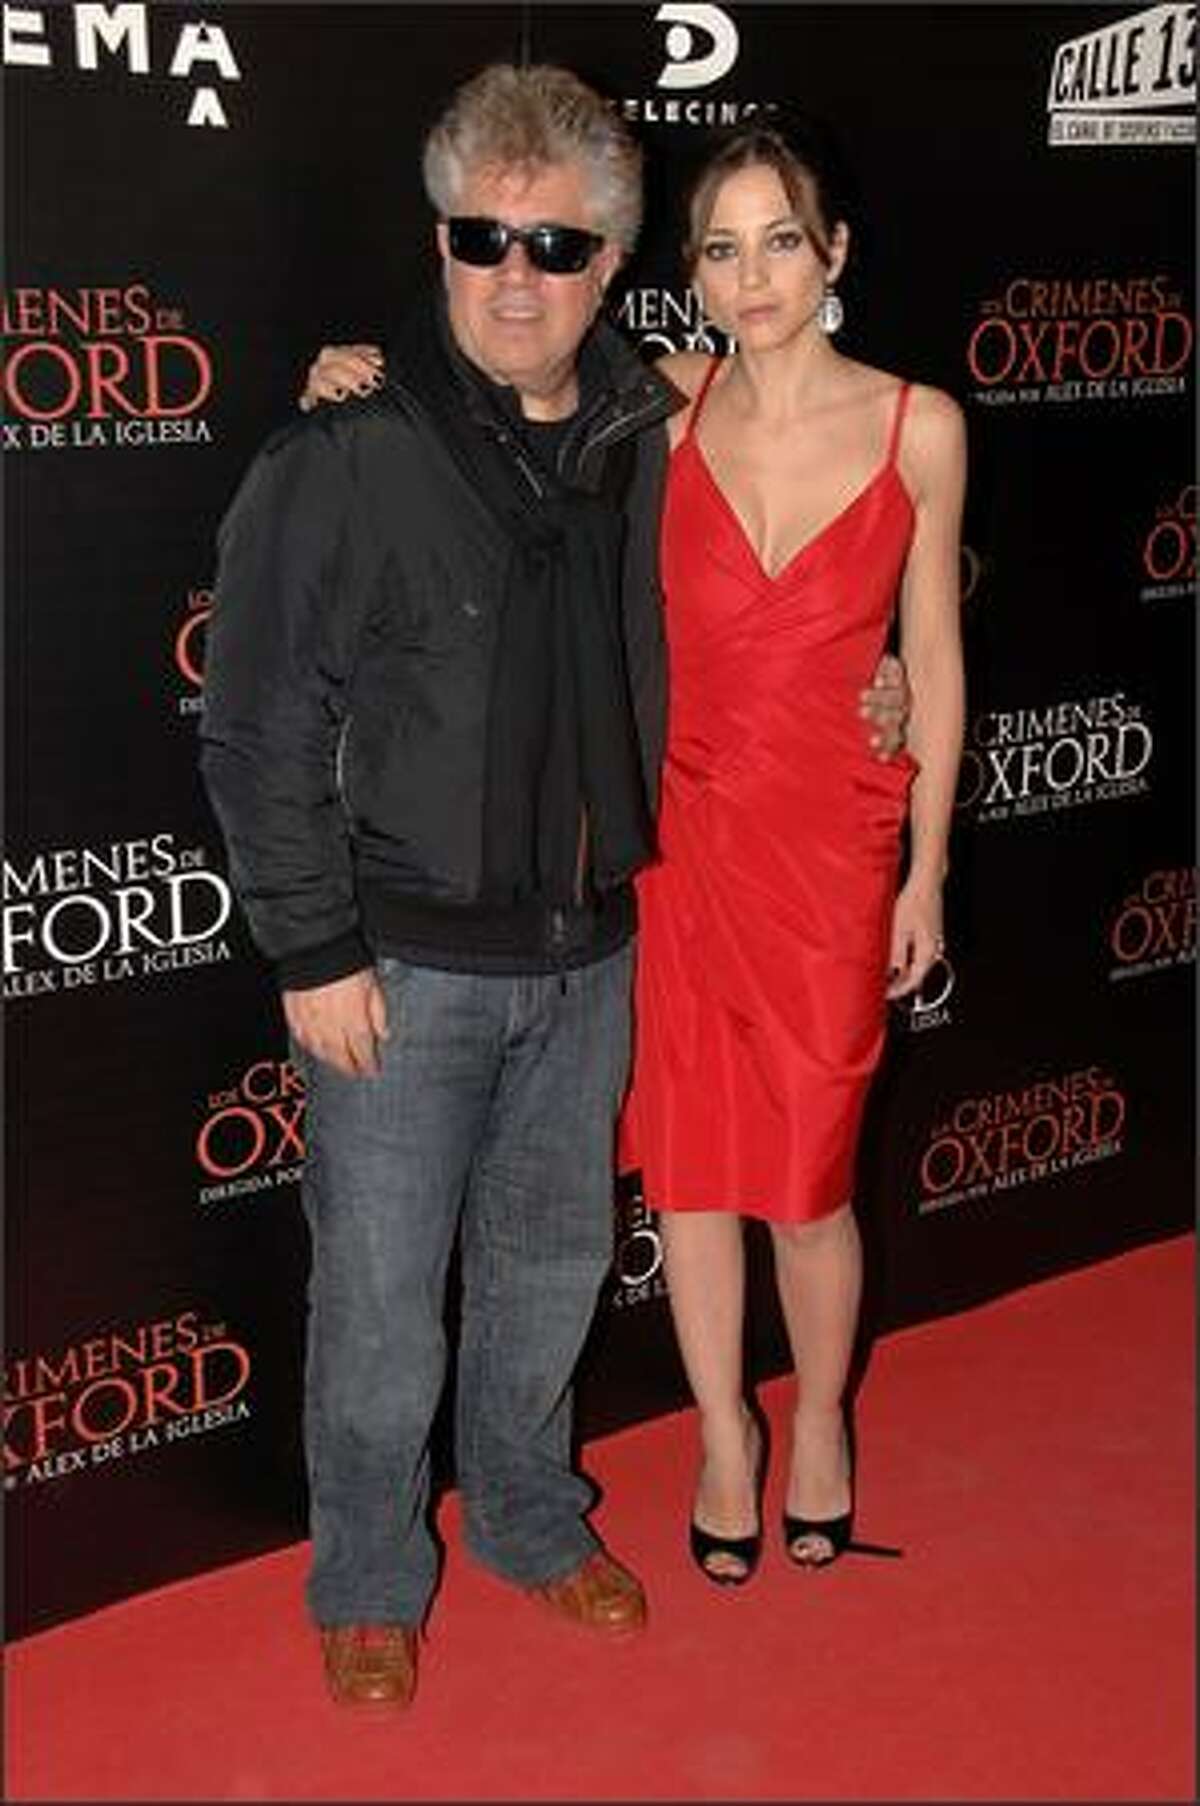 Director Pedro Almodovar and Spanish actress Leonor Watling attend the premiere of "The Oxford Murders" on Thursday at the Palacio de la Musica cinema in Madrid, Spain.